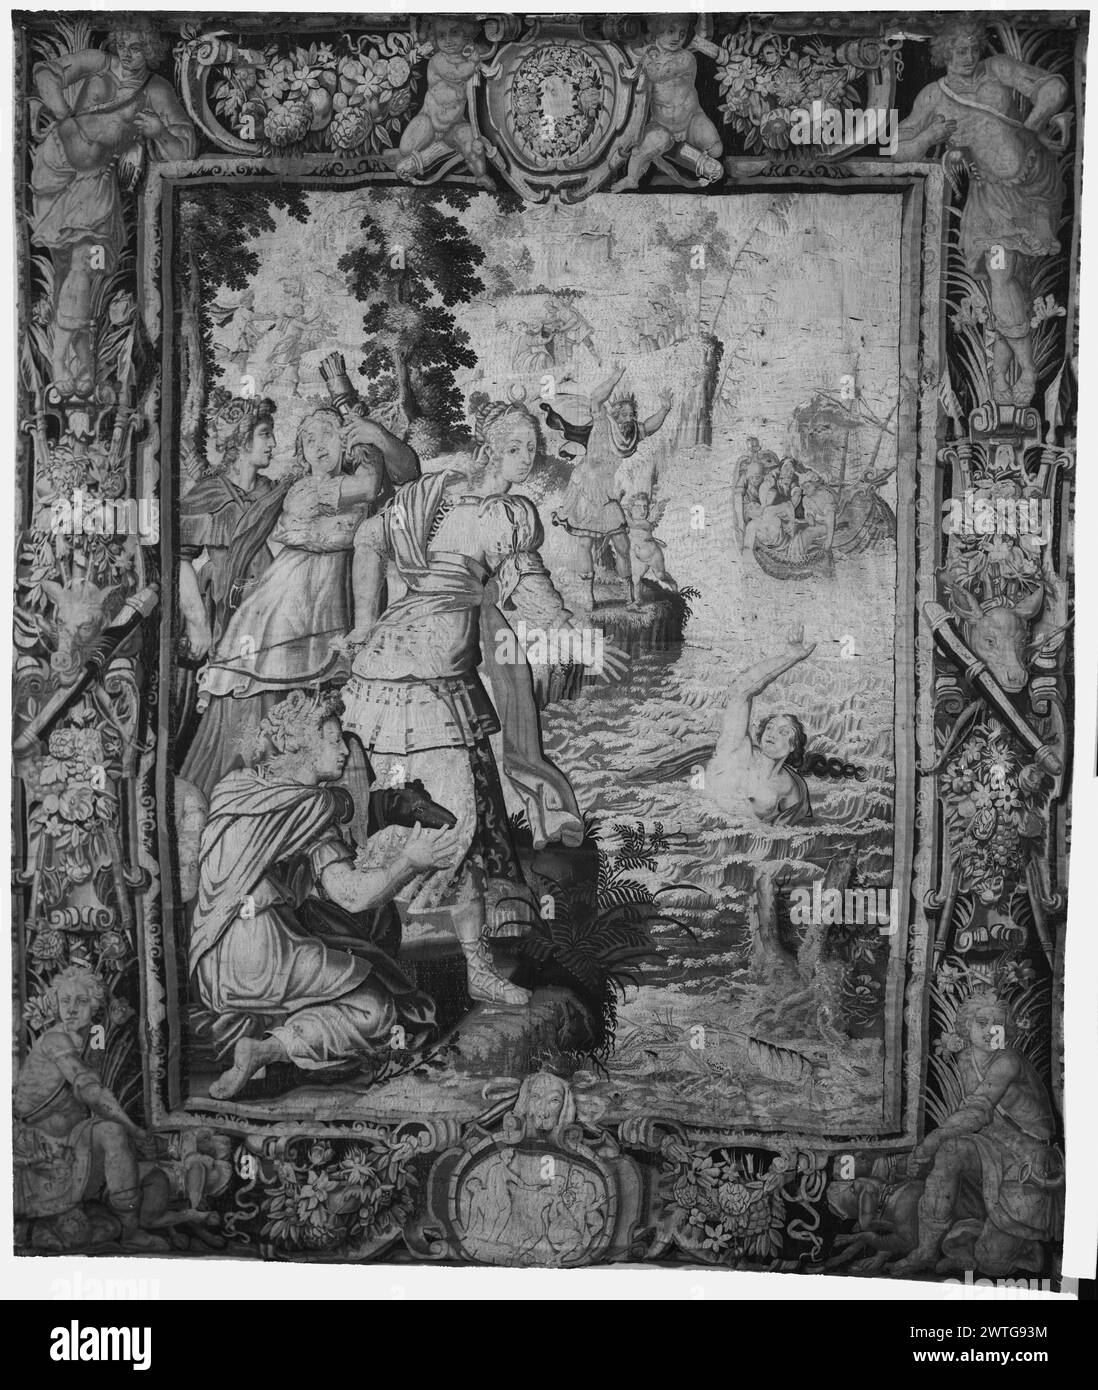 Drowning of Britomartis. Dubreuil, Toussaint (French, 1561-1602) (author of design) [painter] c. 1630-1650 Tapestry Dimensions: H 12'10' x W 11'9' Tapestry Materials/Techniques: unknown Culture: French Weaving Center: Paris Ownership History: French & Co. purchased from Sol Mindlin, received 1/4/1961; sold to Service des Monuments Historiques 6/7/1963. At edge of water, Diana, accompanied by 3 hunting maidens & hunting dog, reaches out towards drowning Britomartis (foreground); farther along the bank King Minos with raised arms, accompanied by Cupid, observes drowning Britomartis; farther in d Stock Photo